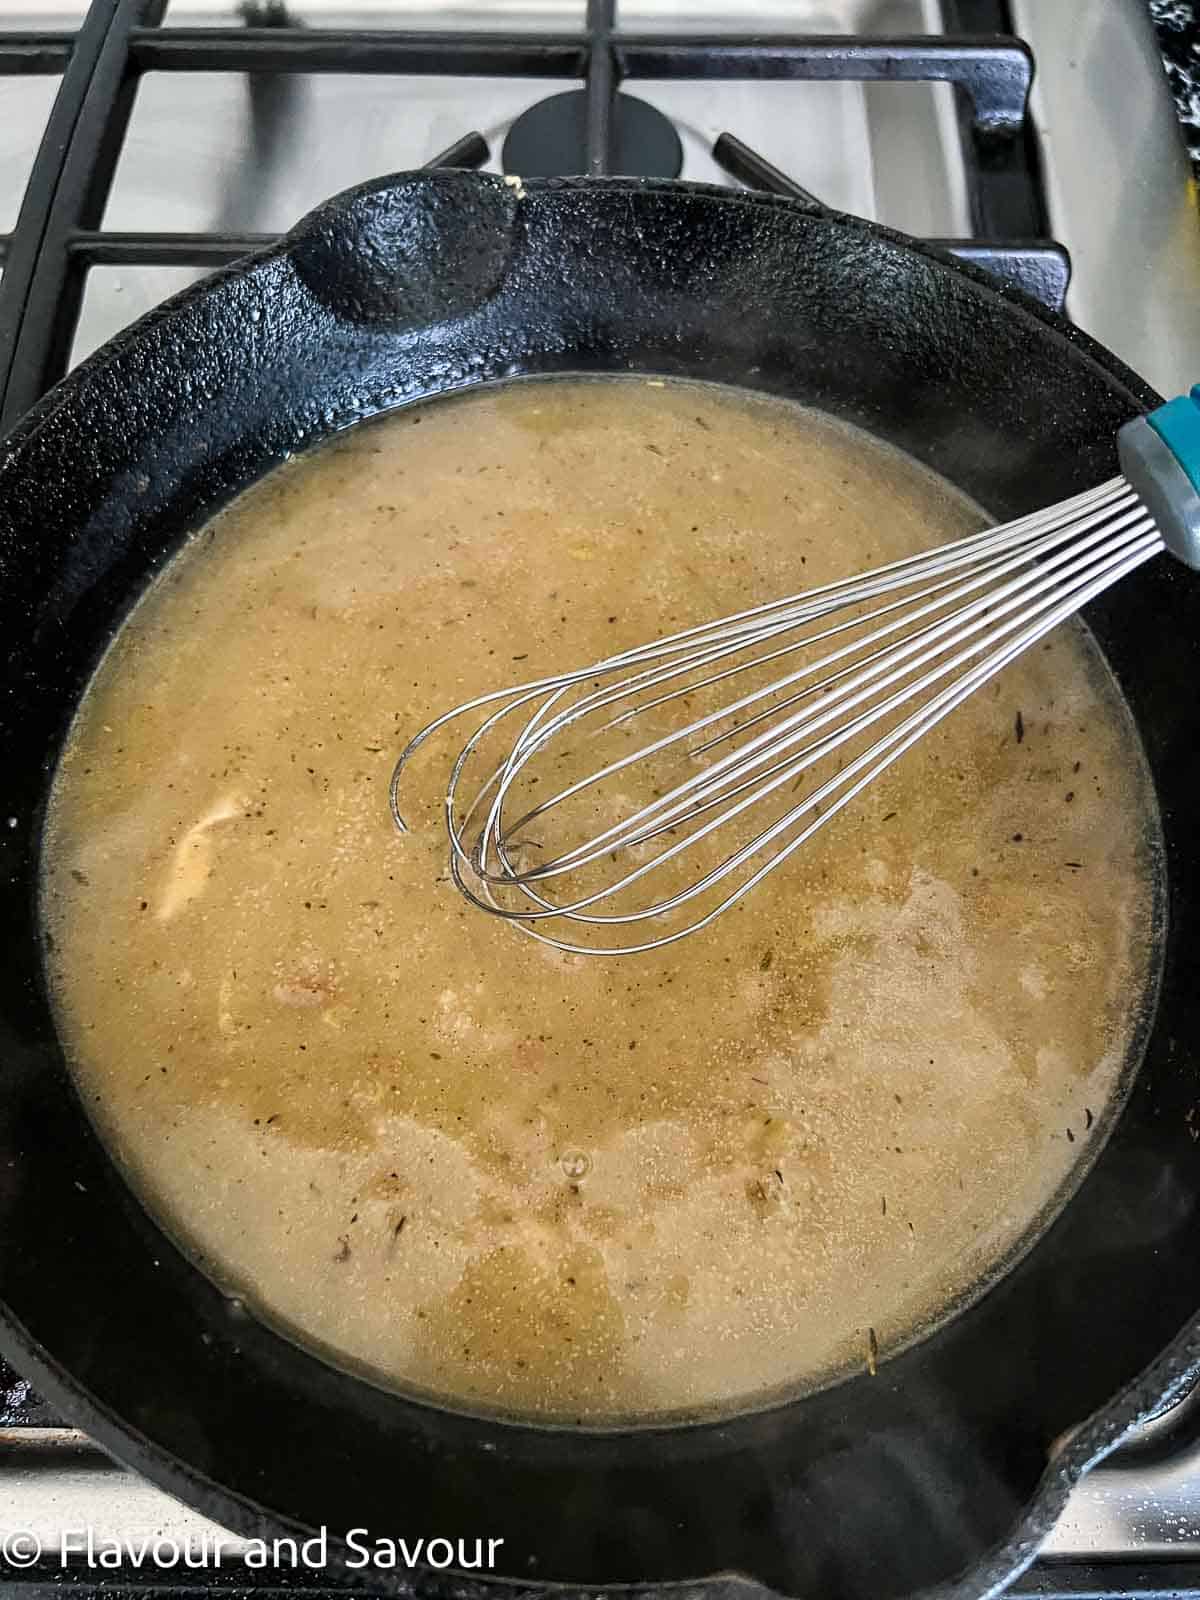 Sauce for chicken with prosciutto in a cast iron skillet with a whisk.